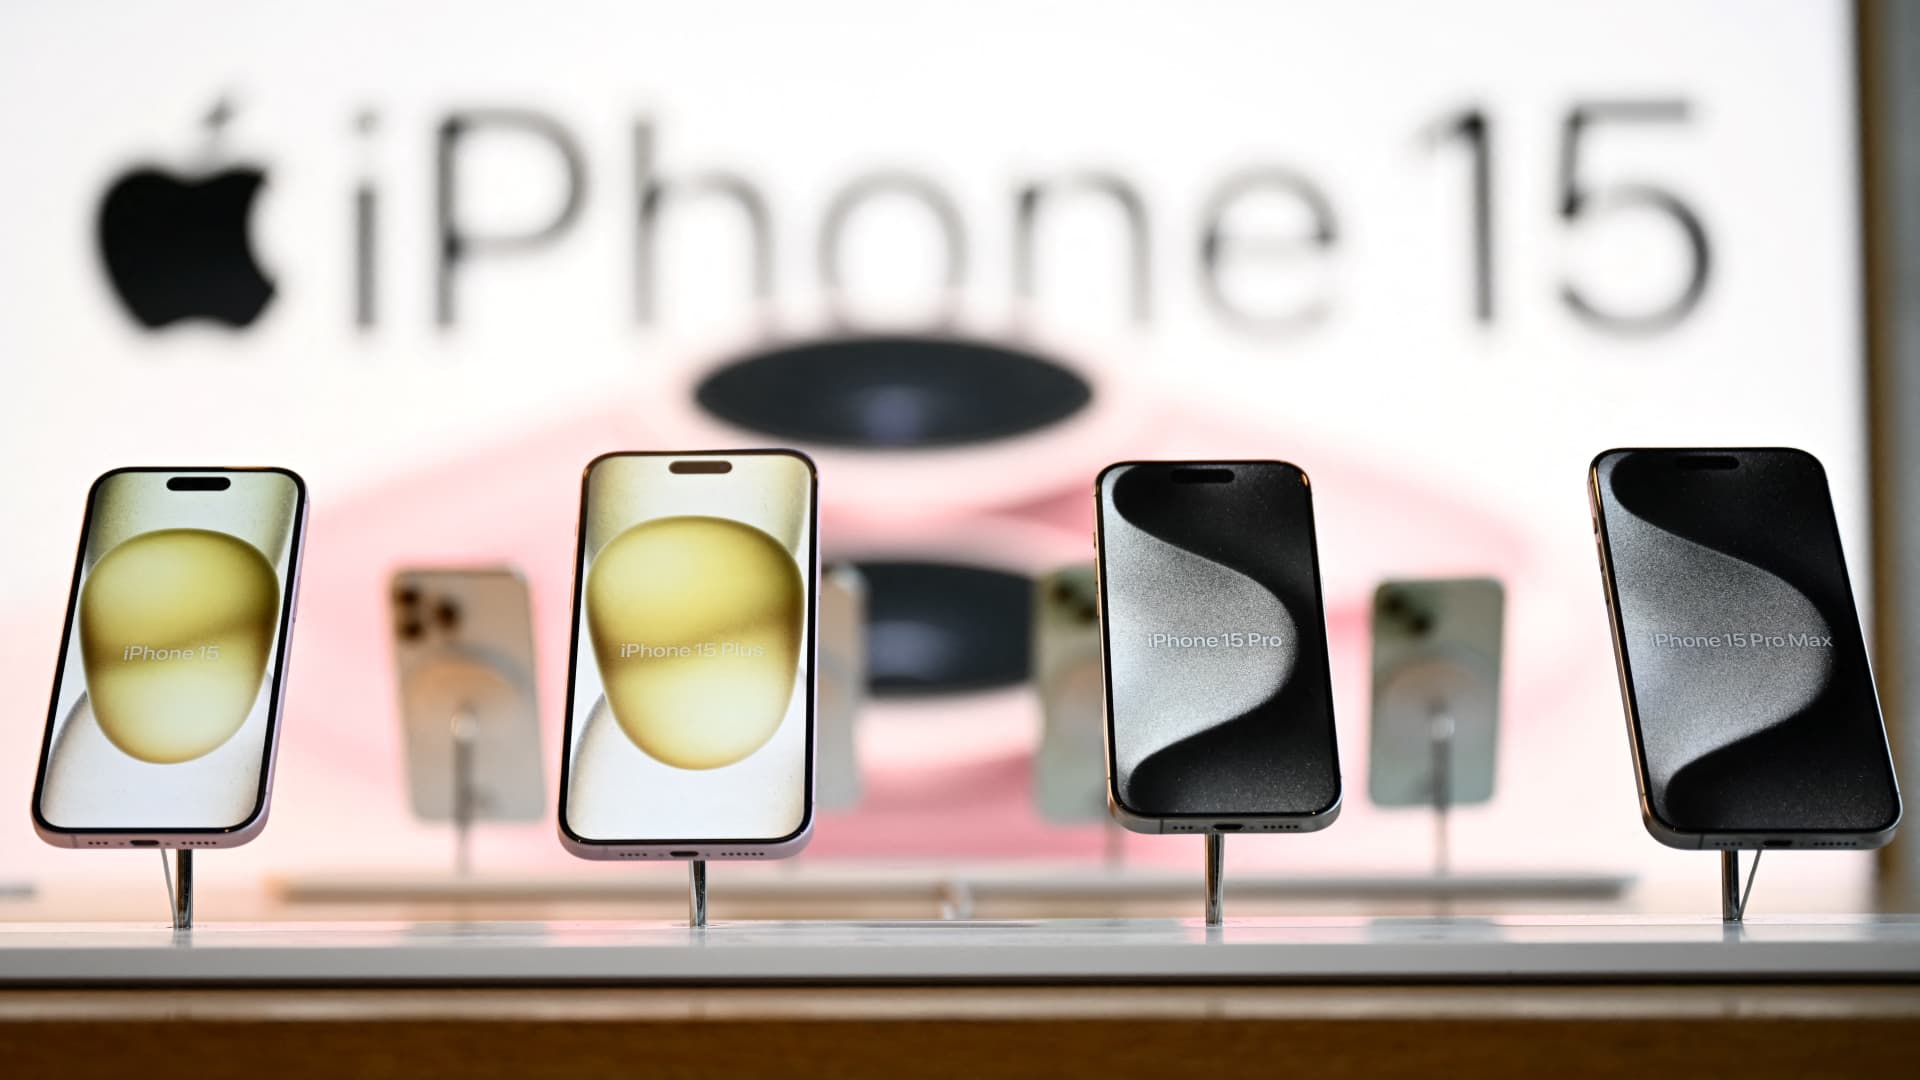 Apple iPhone gross sales drop 19% in China as Huawei demand soars: Counterpoint